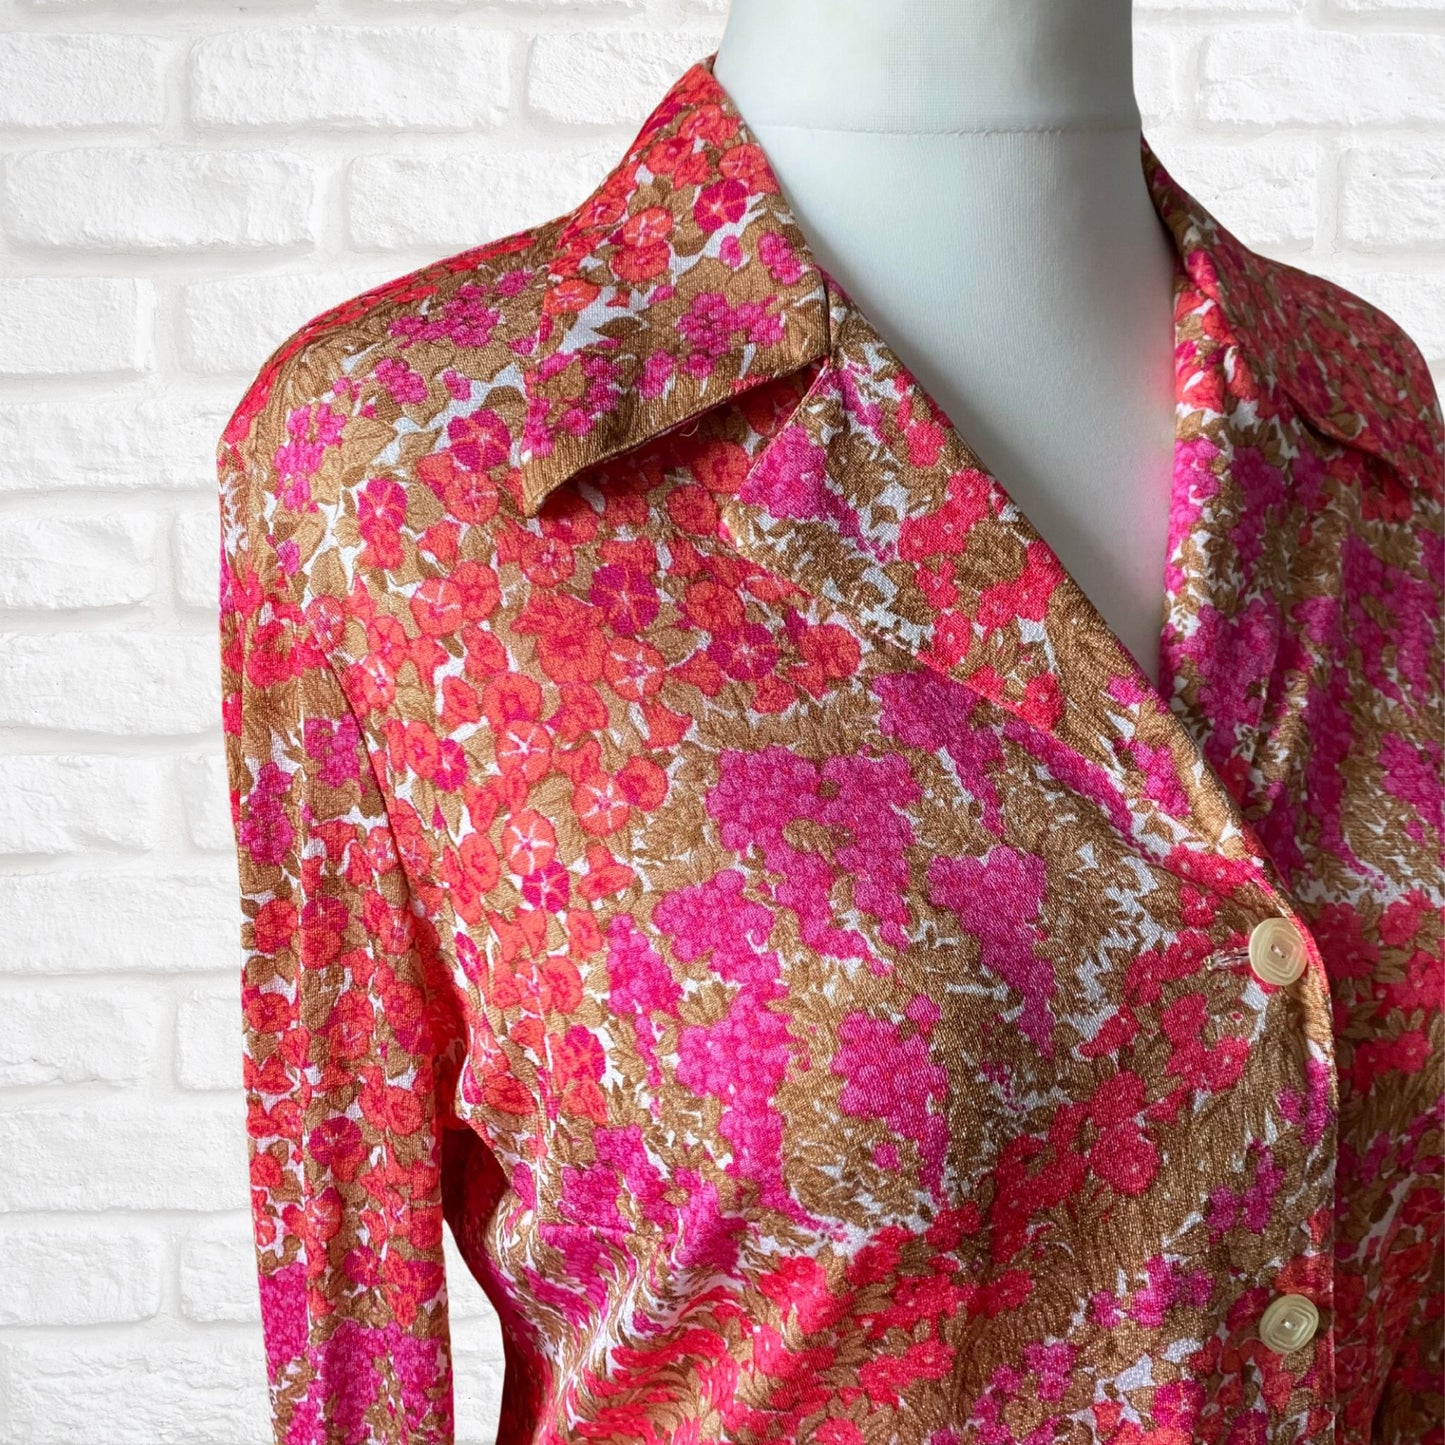 70s pink floral blouse with dagger collar and long cuffed sleeves.Approx UK size 14-16